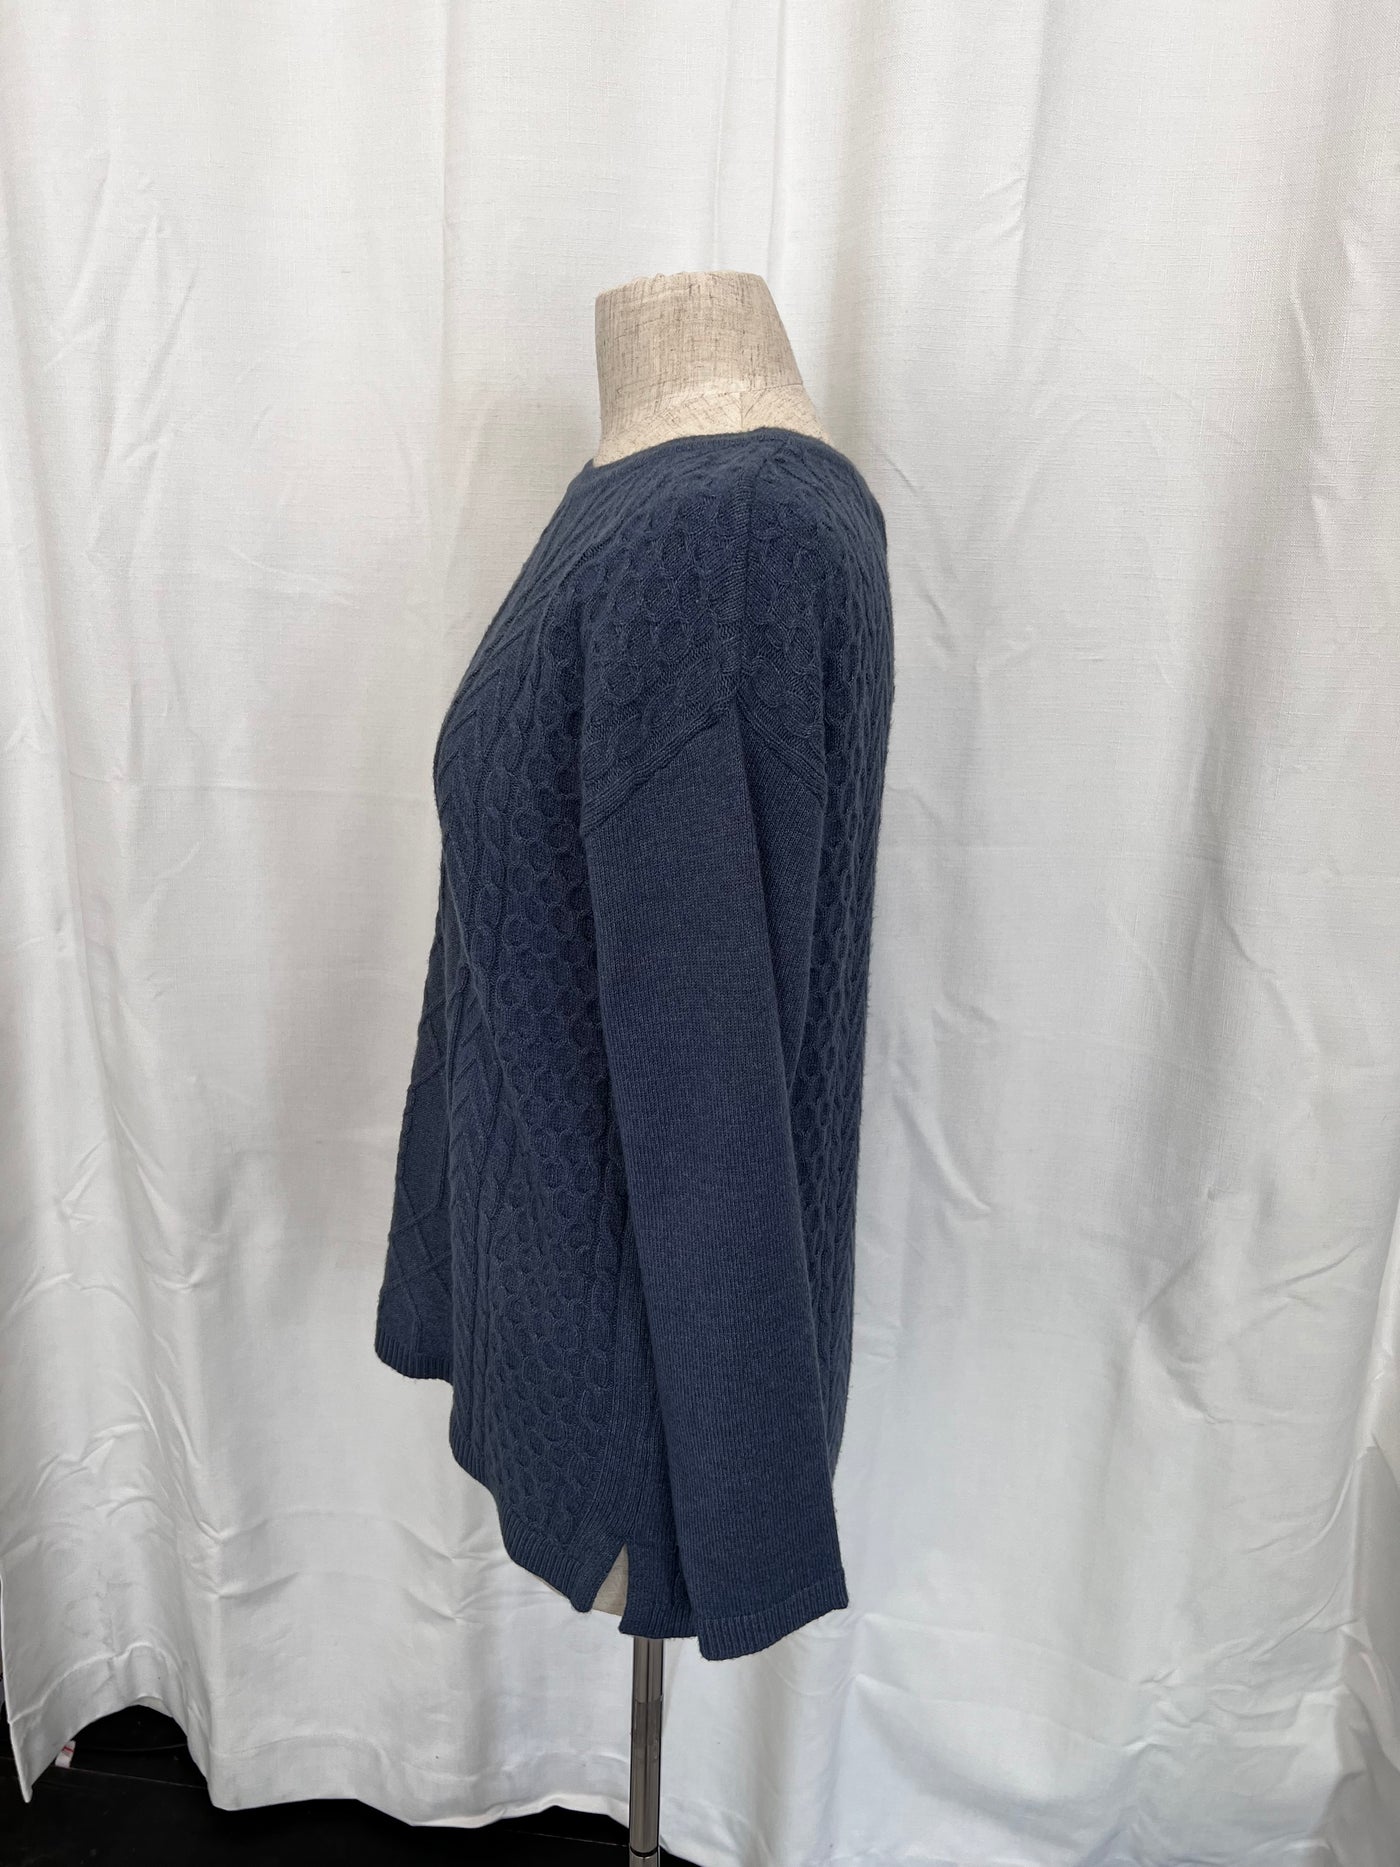 Linked Together Sweater in Blue